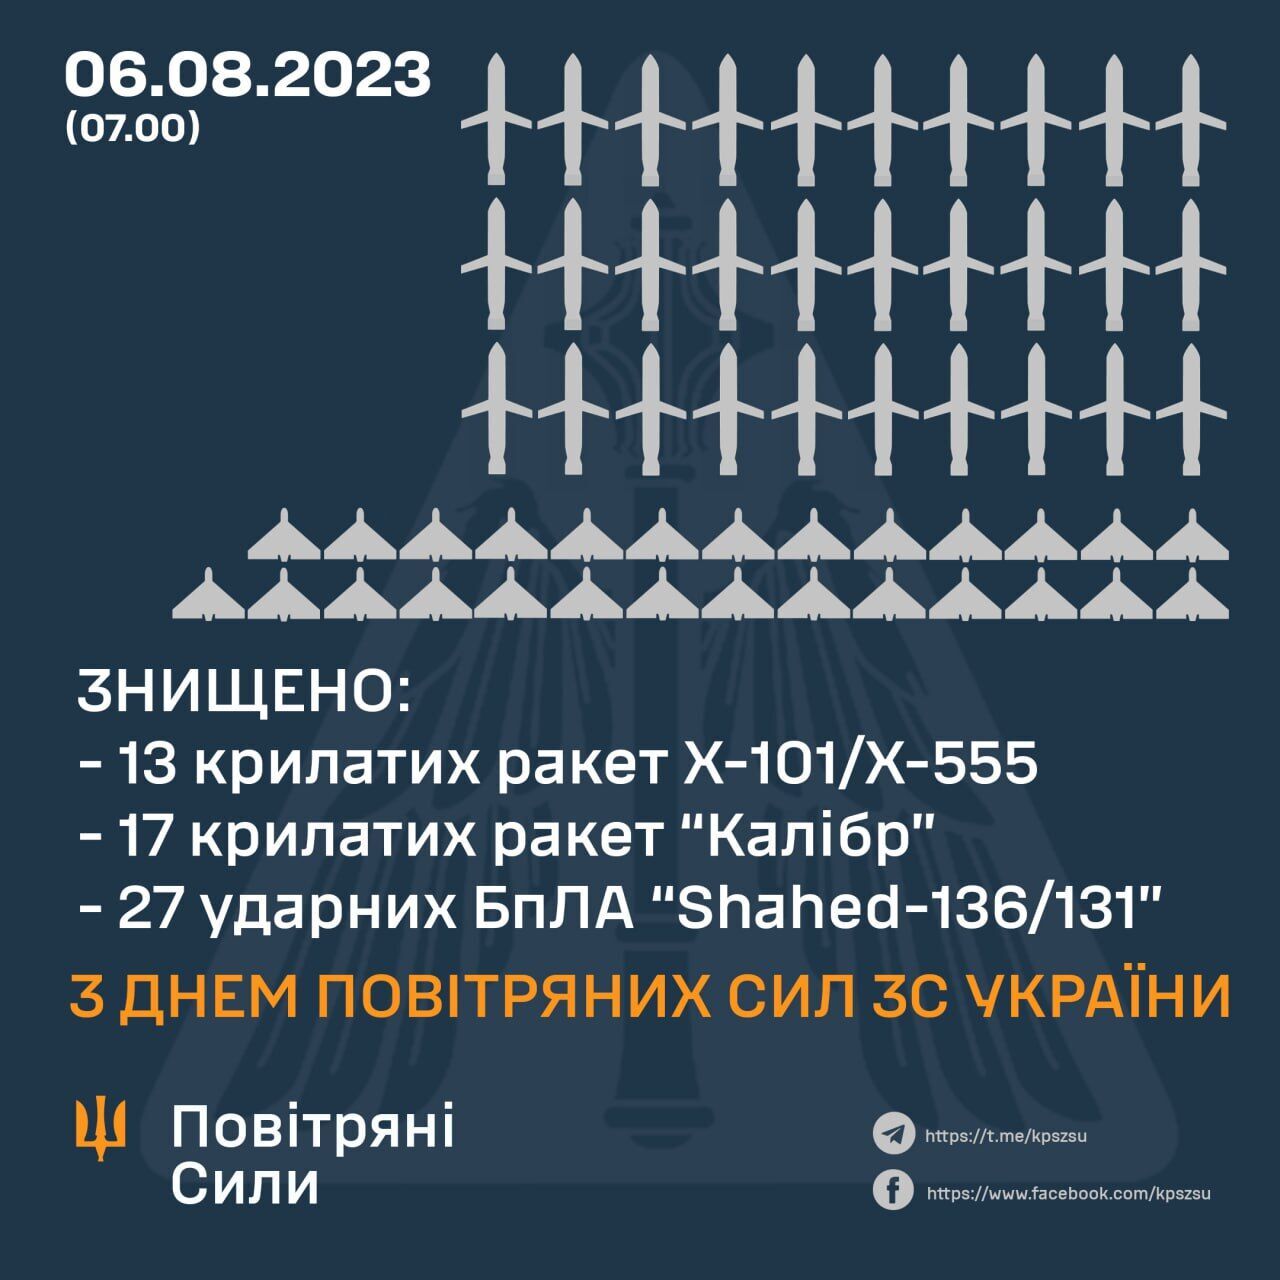 Air Defense Forces destroyed 57 out of 70 missiles and drones that Russia fired at Ukraine: the enemy attacked in two waves